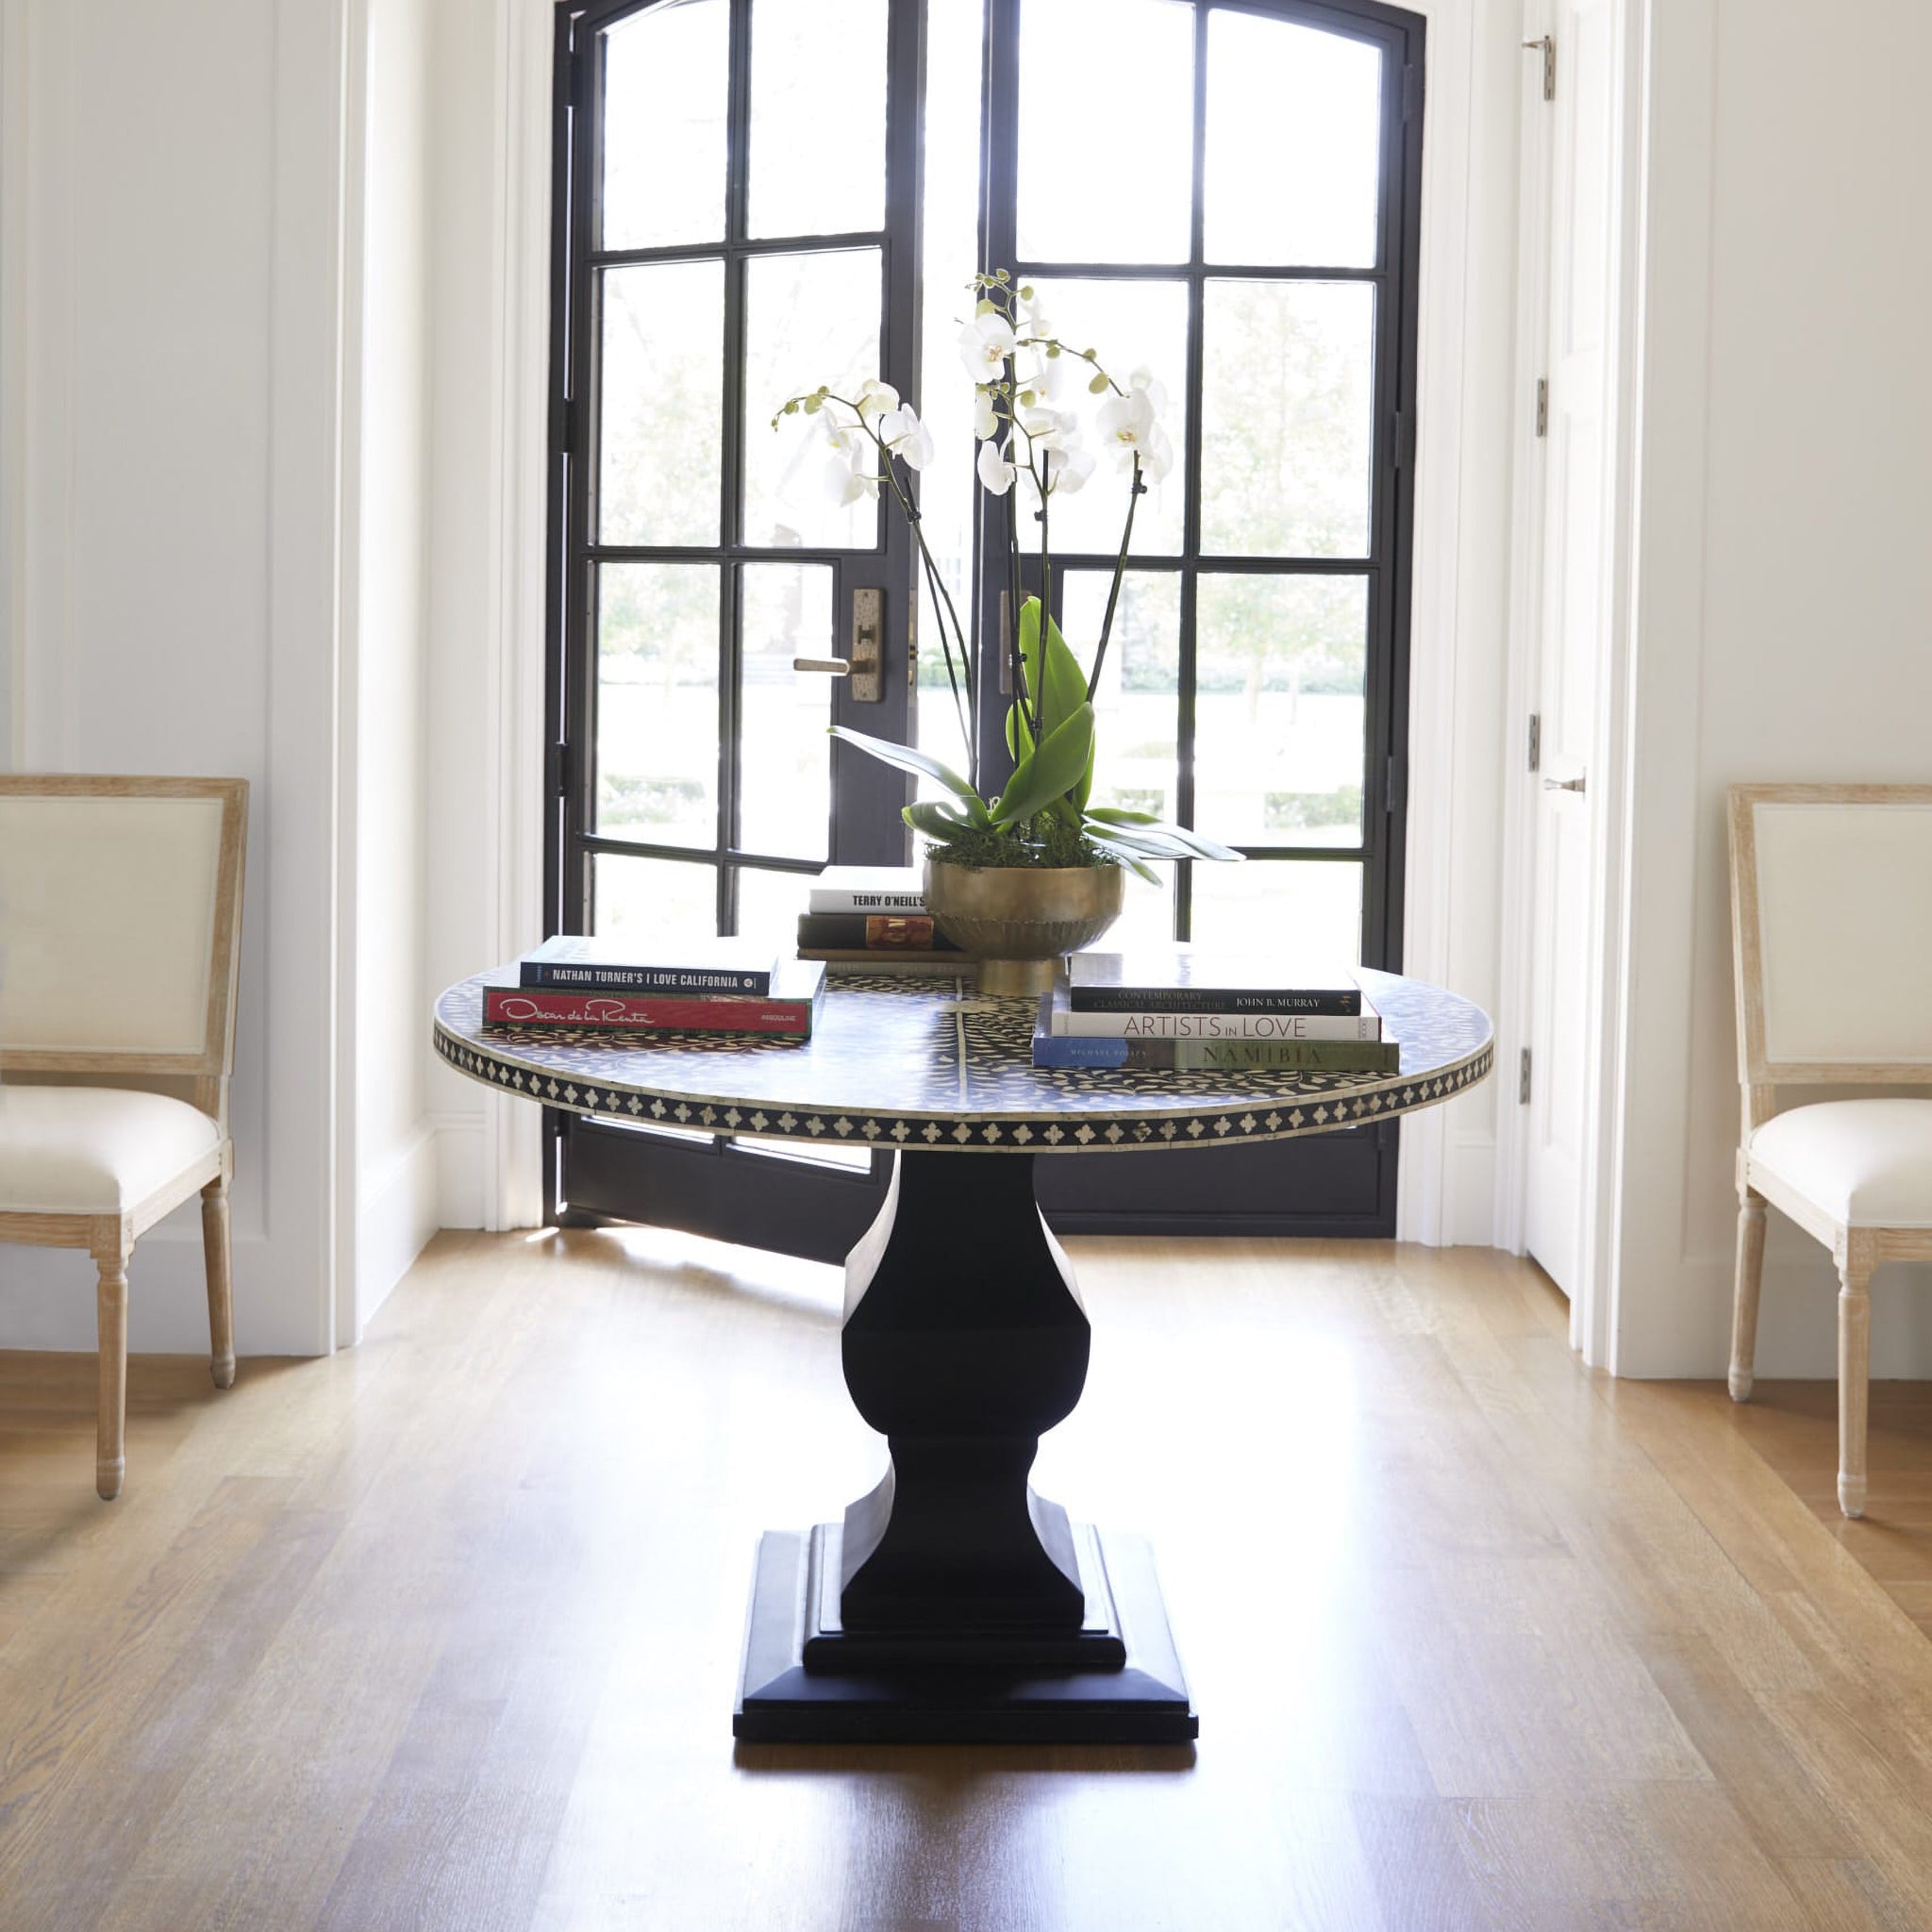 Moorish Dining Table in a Living Room Setting With Flower Vase and Books on Top